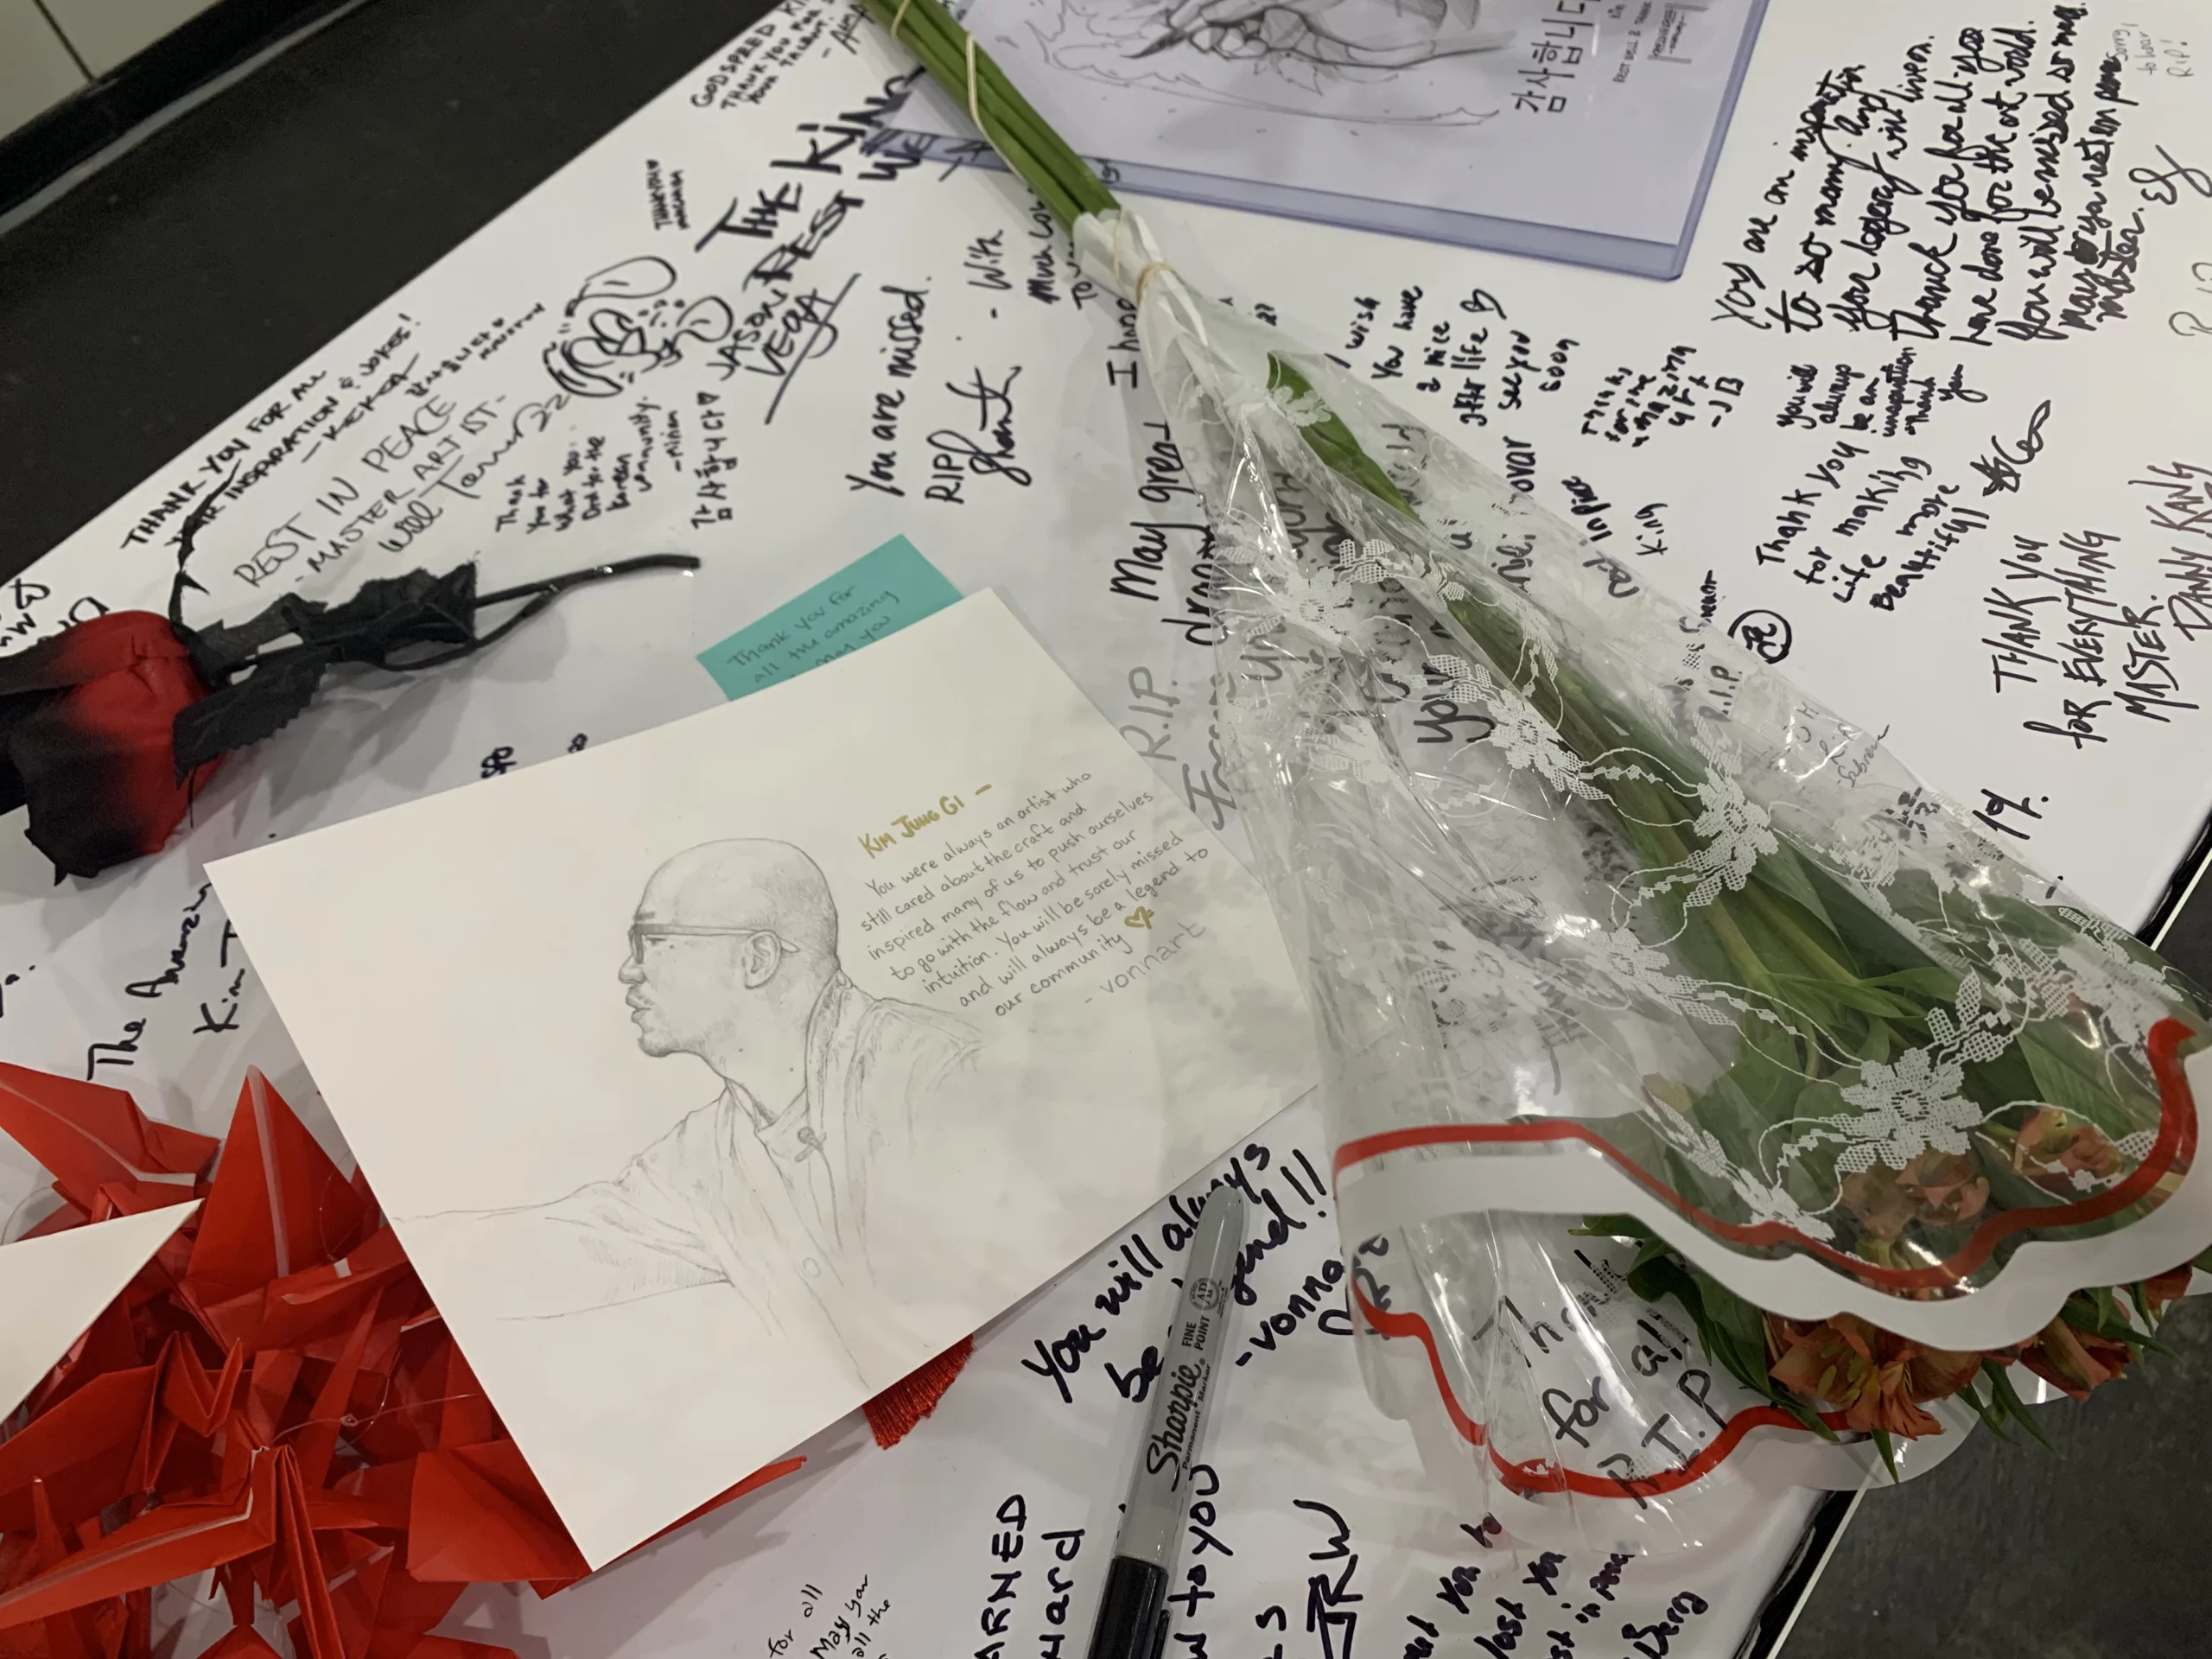 flowers and notes left on Kim Jung Gi's Artist Alley table